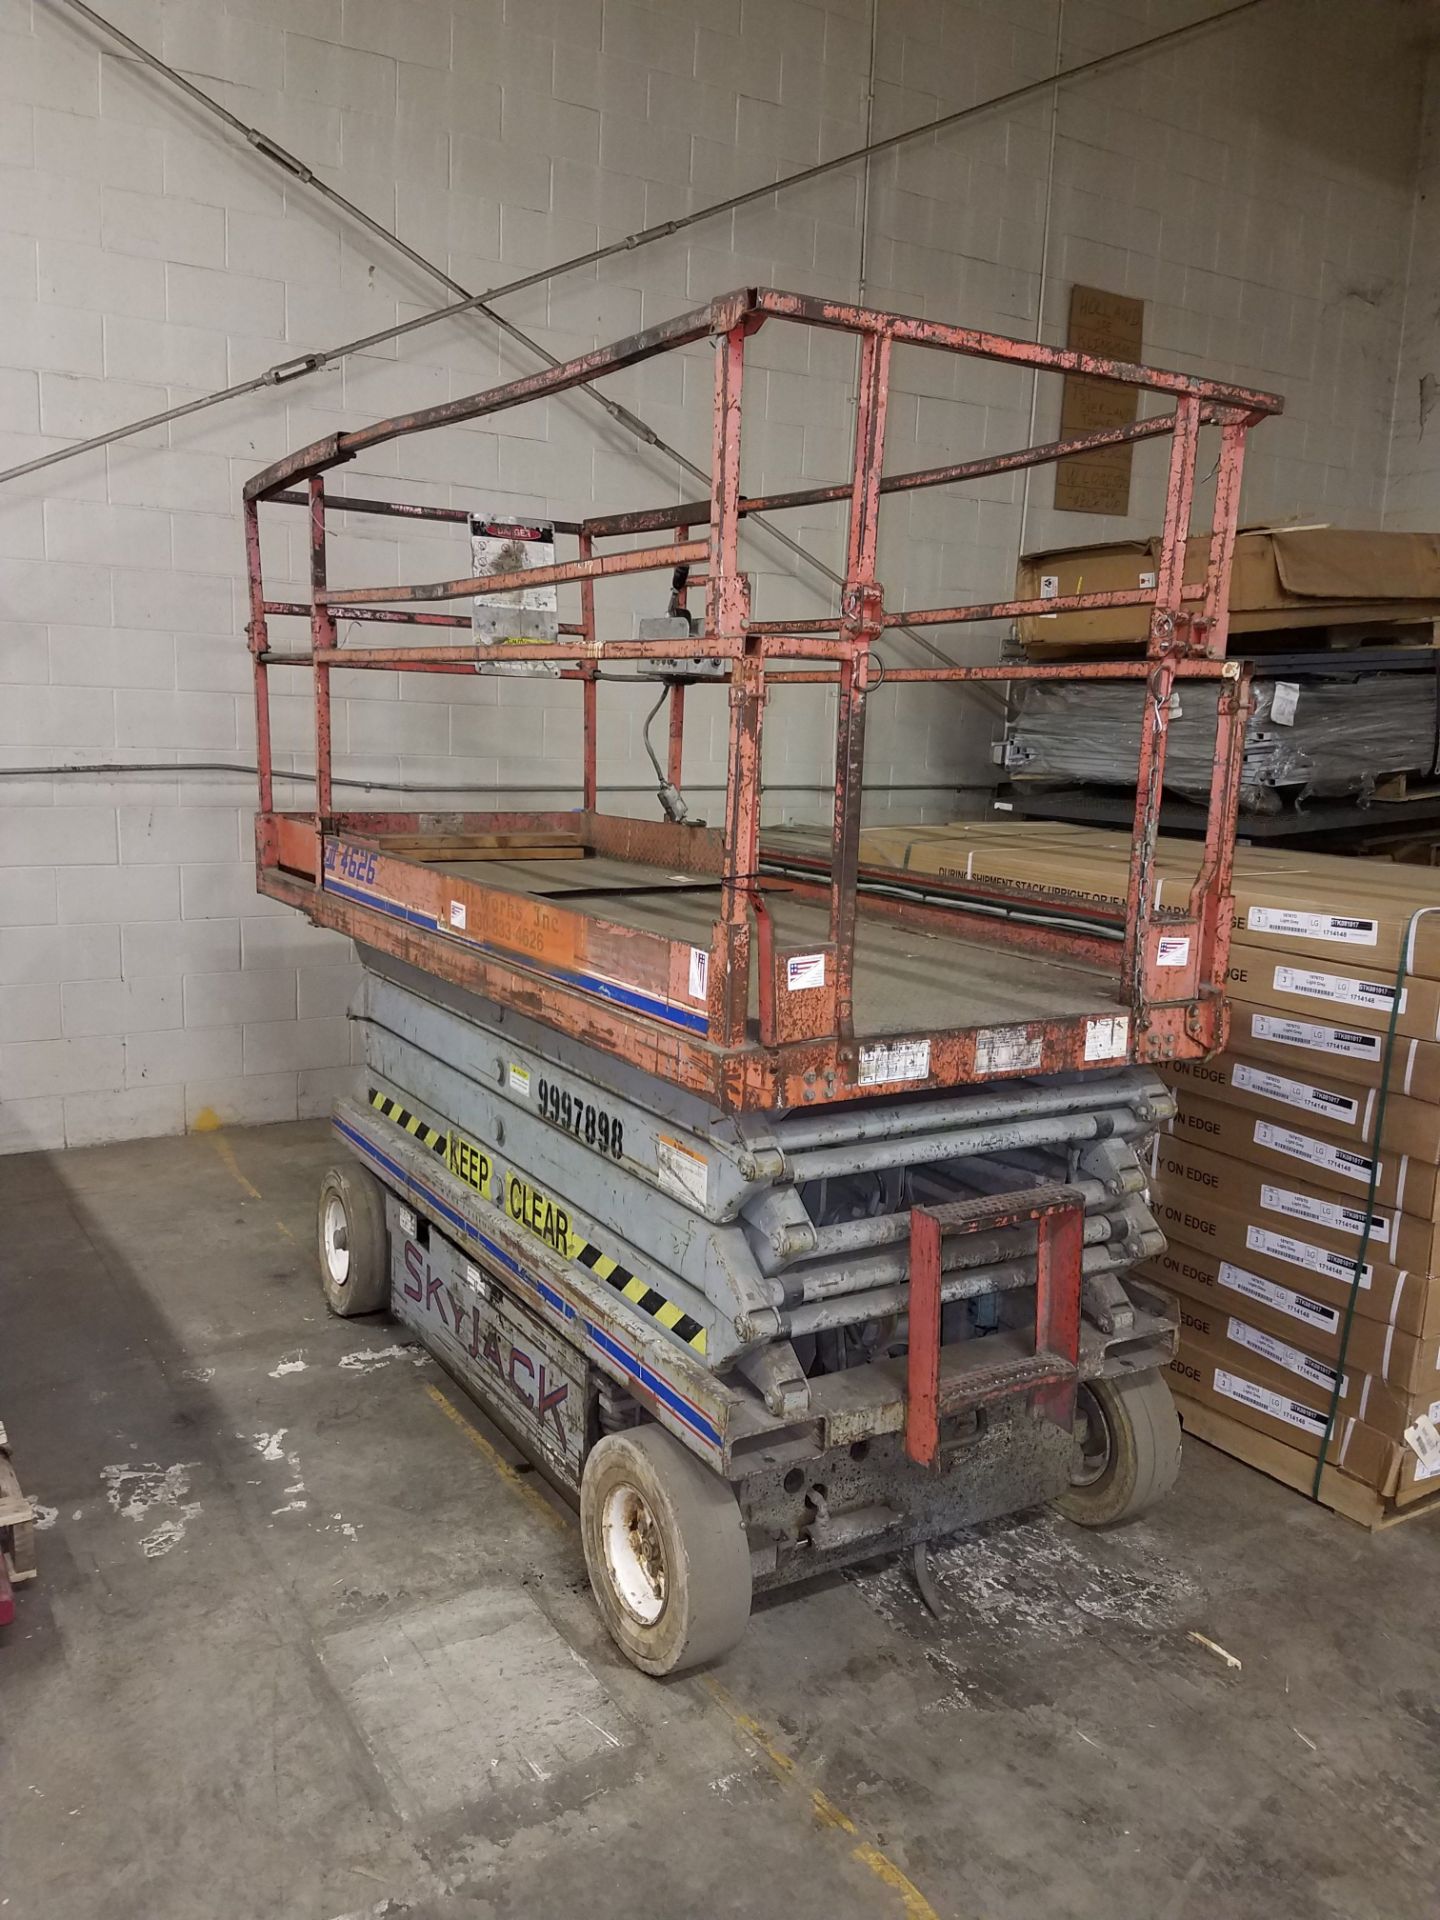 SKYJACK MODEL 4626 ELECTRIC SCISSOR LIFT, 45" WIDE X 83" LONG PLATFORM (RATED AT 850 LB.), WITH